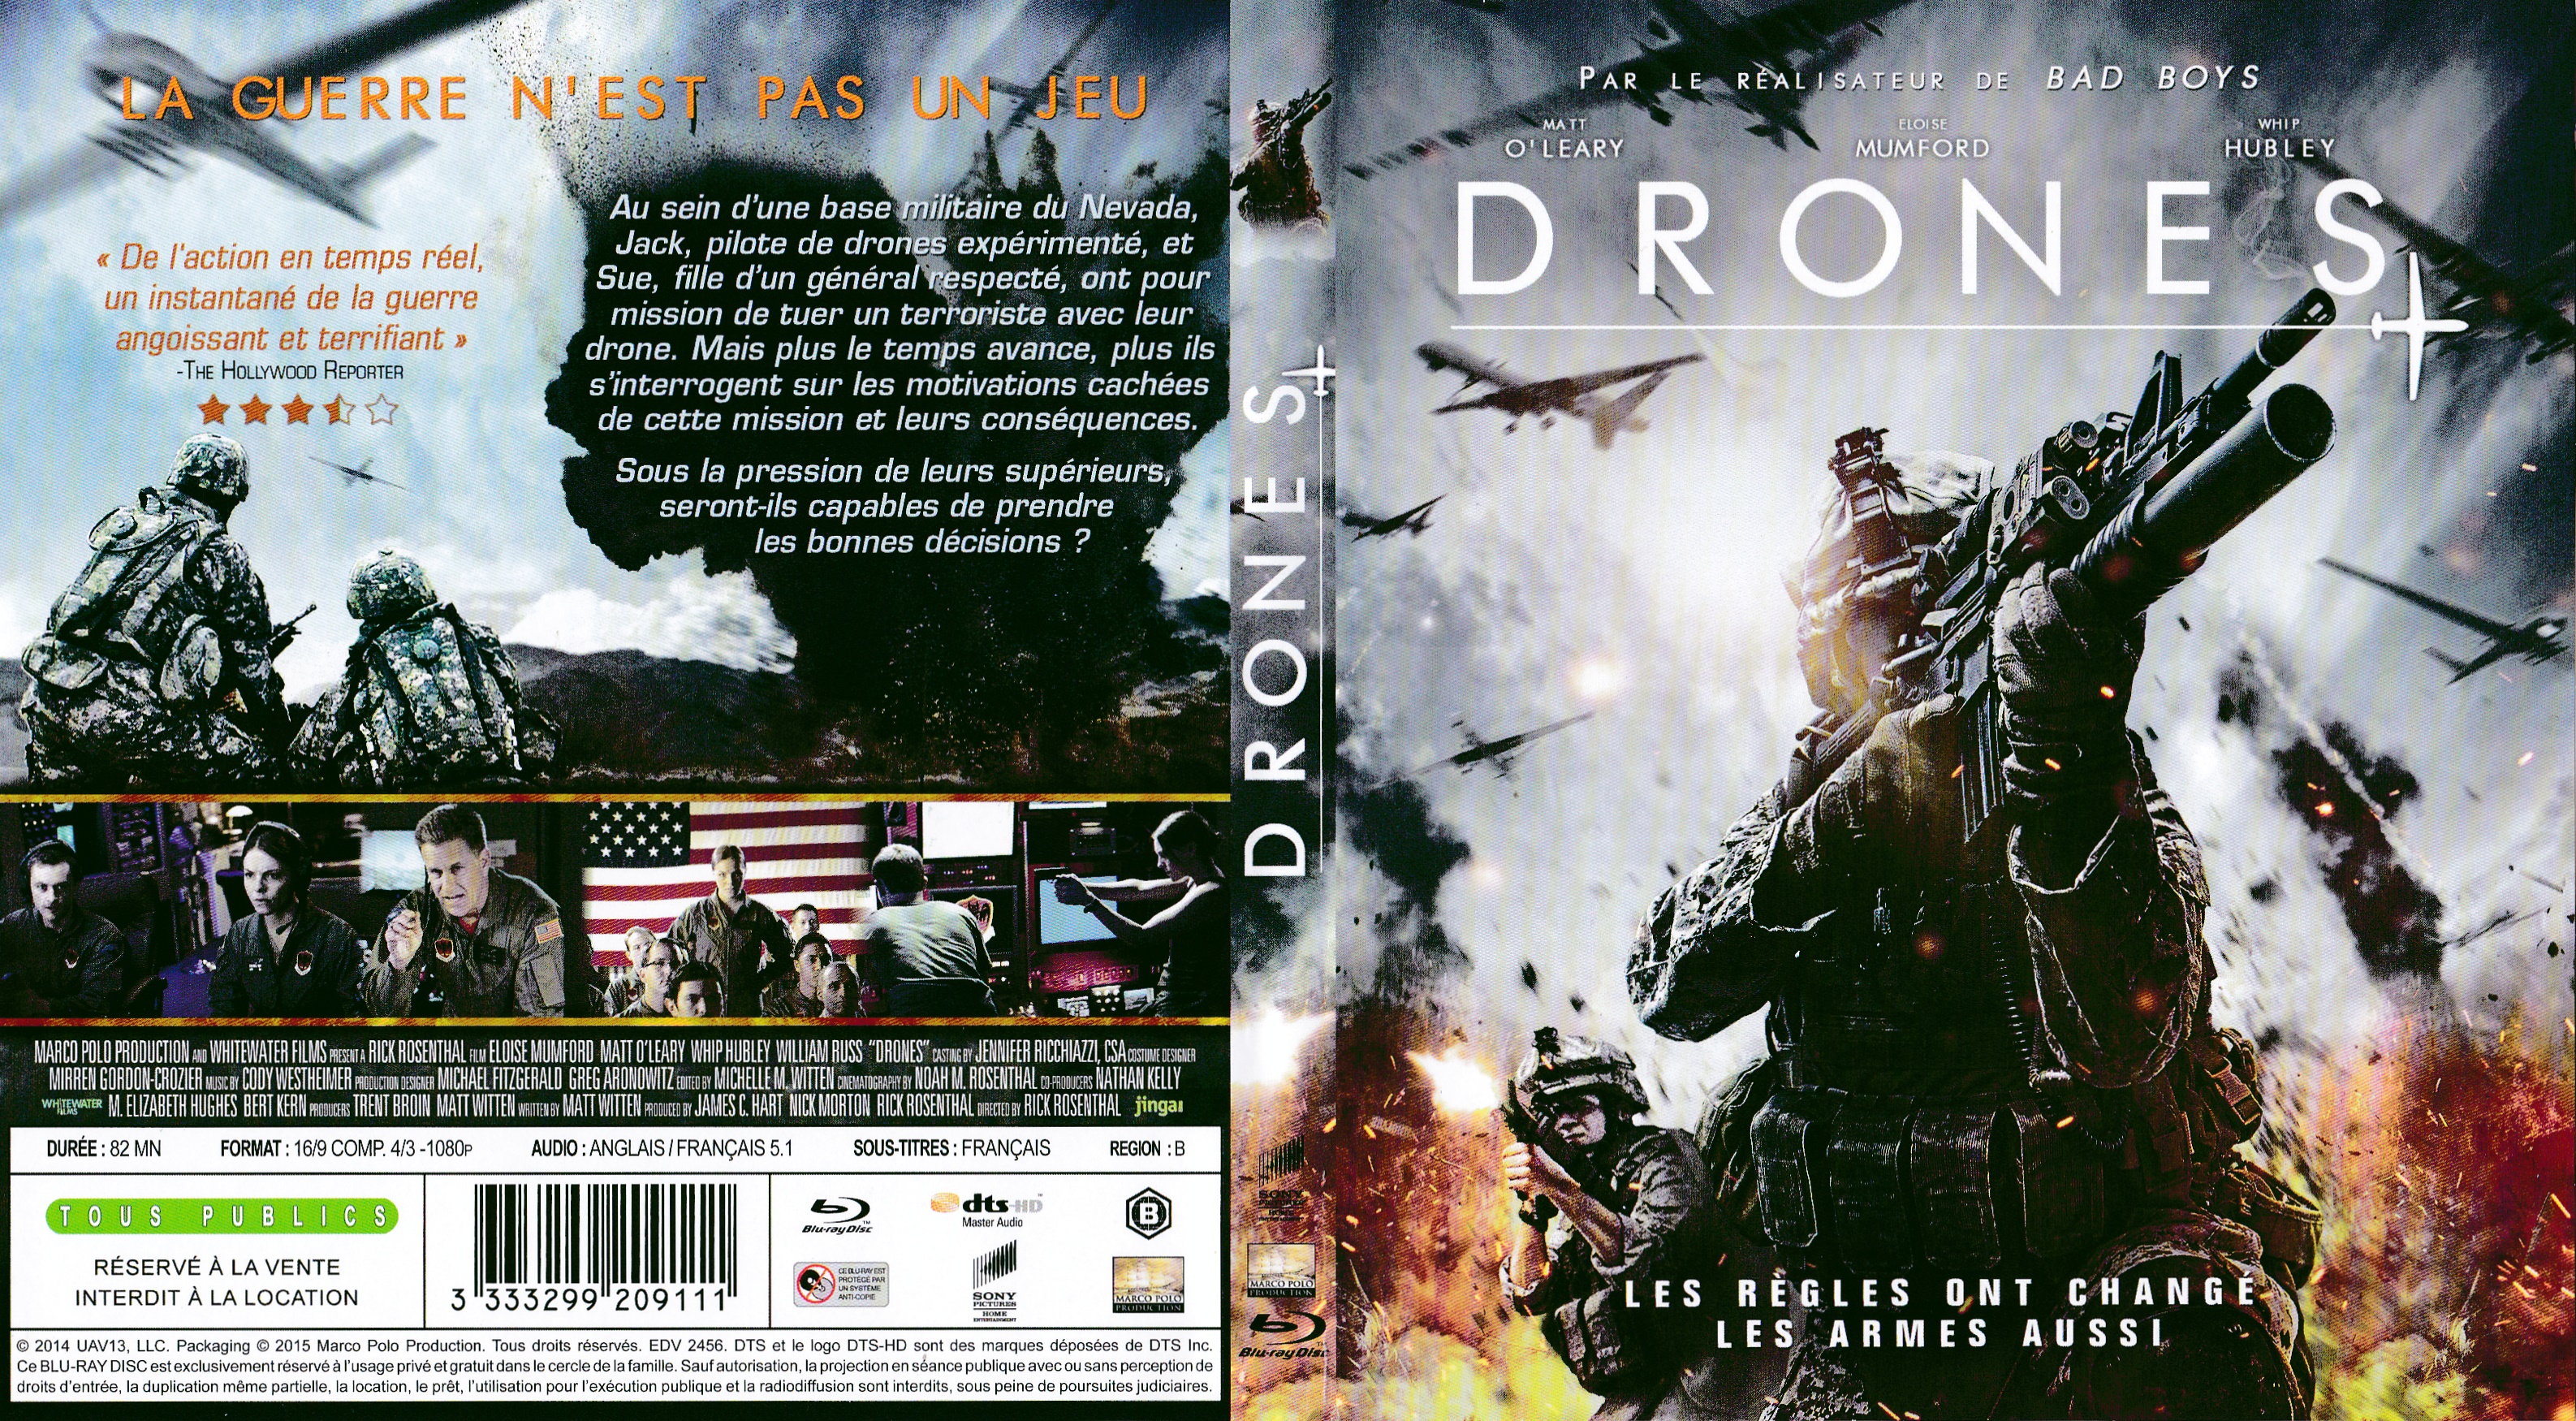 Jaquette DVD Drones (BLU-RAY)